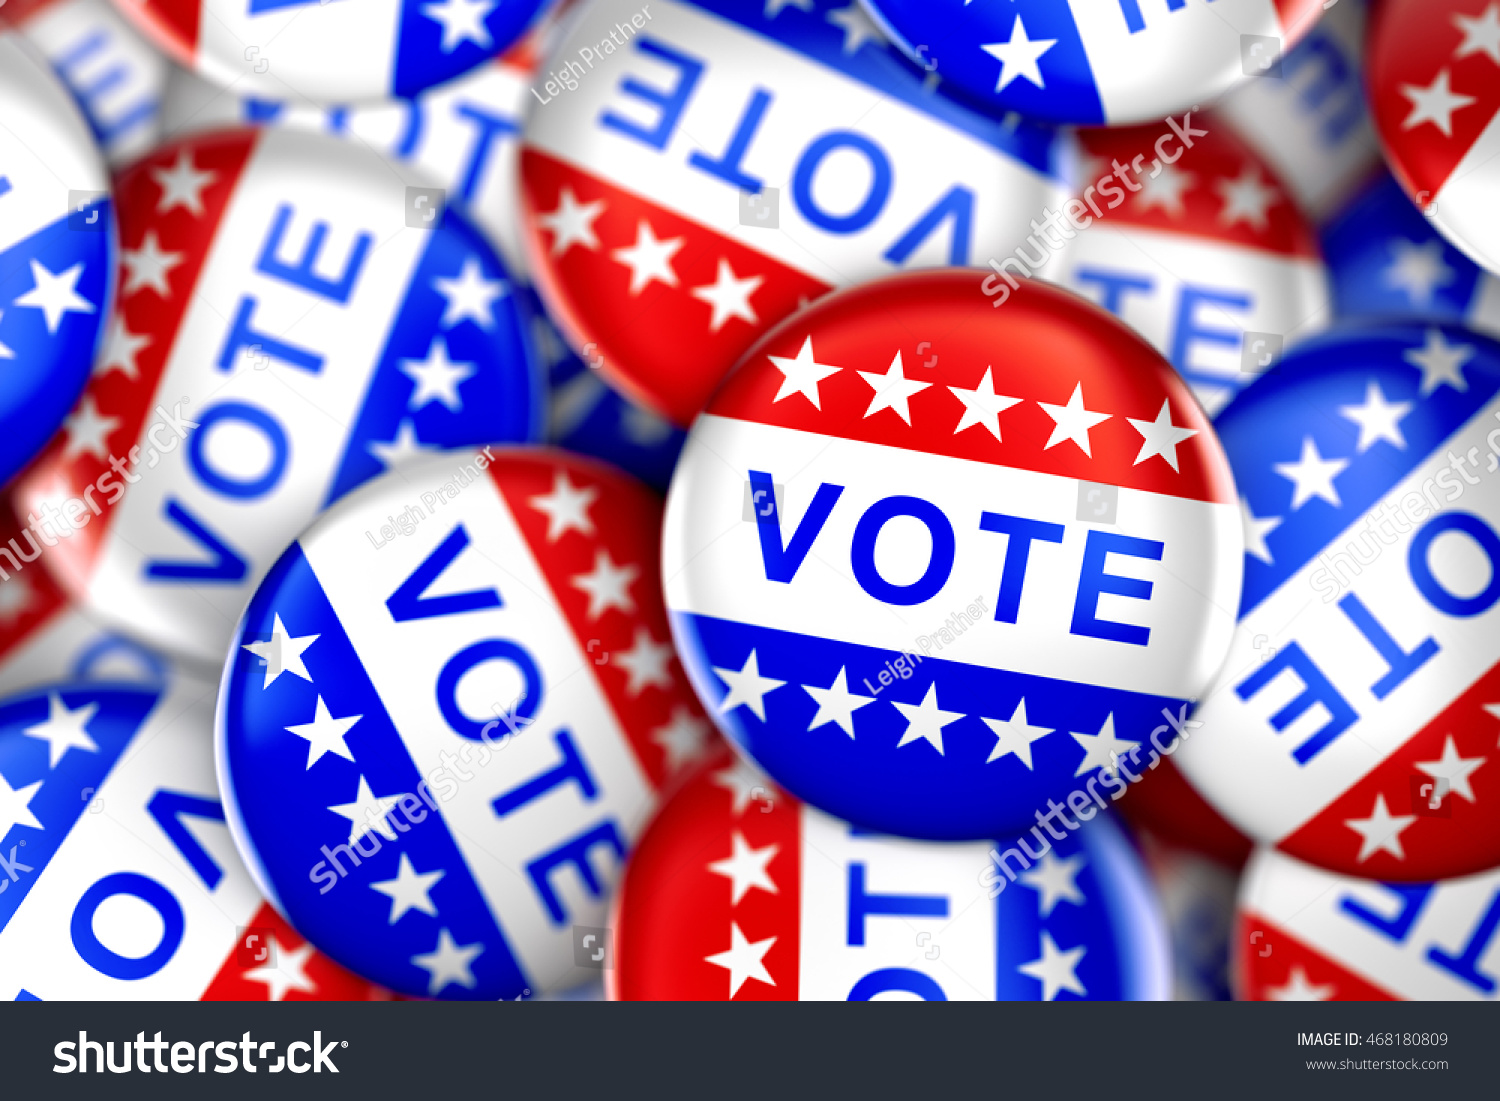 Vote button in red, white, and blue with stars - 3d rendering #468180809